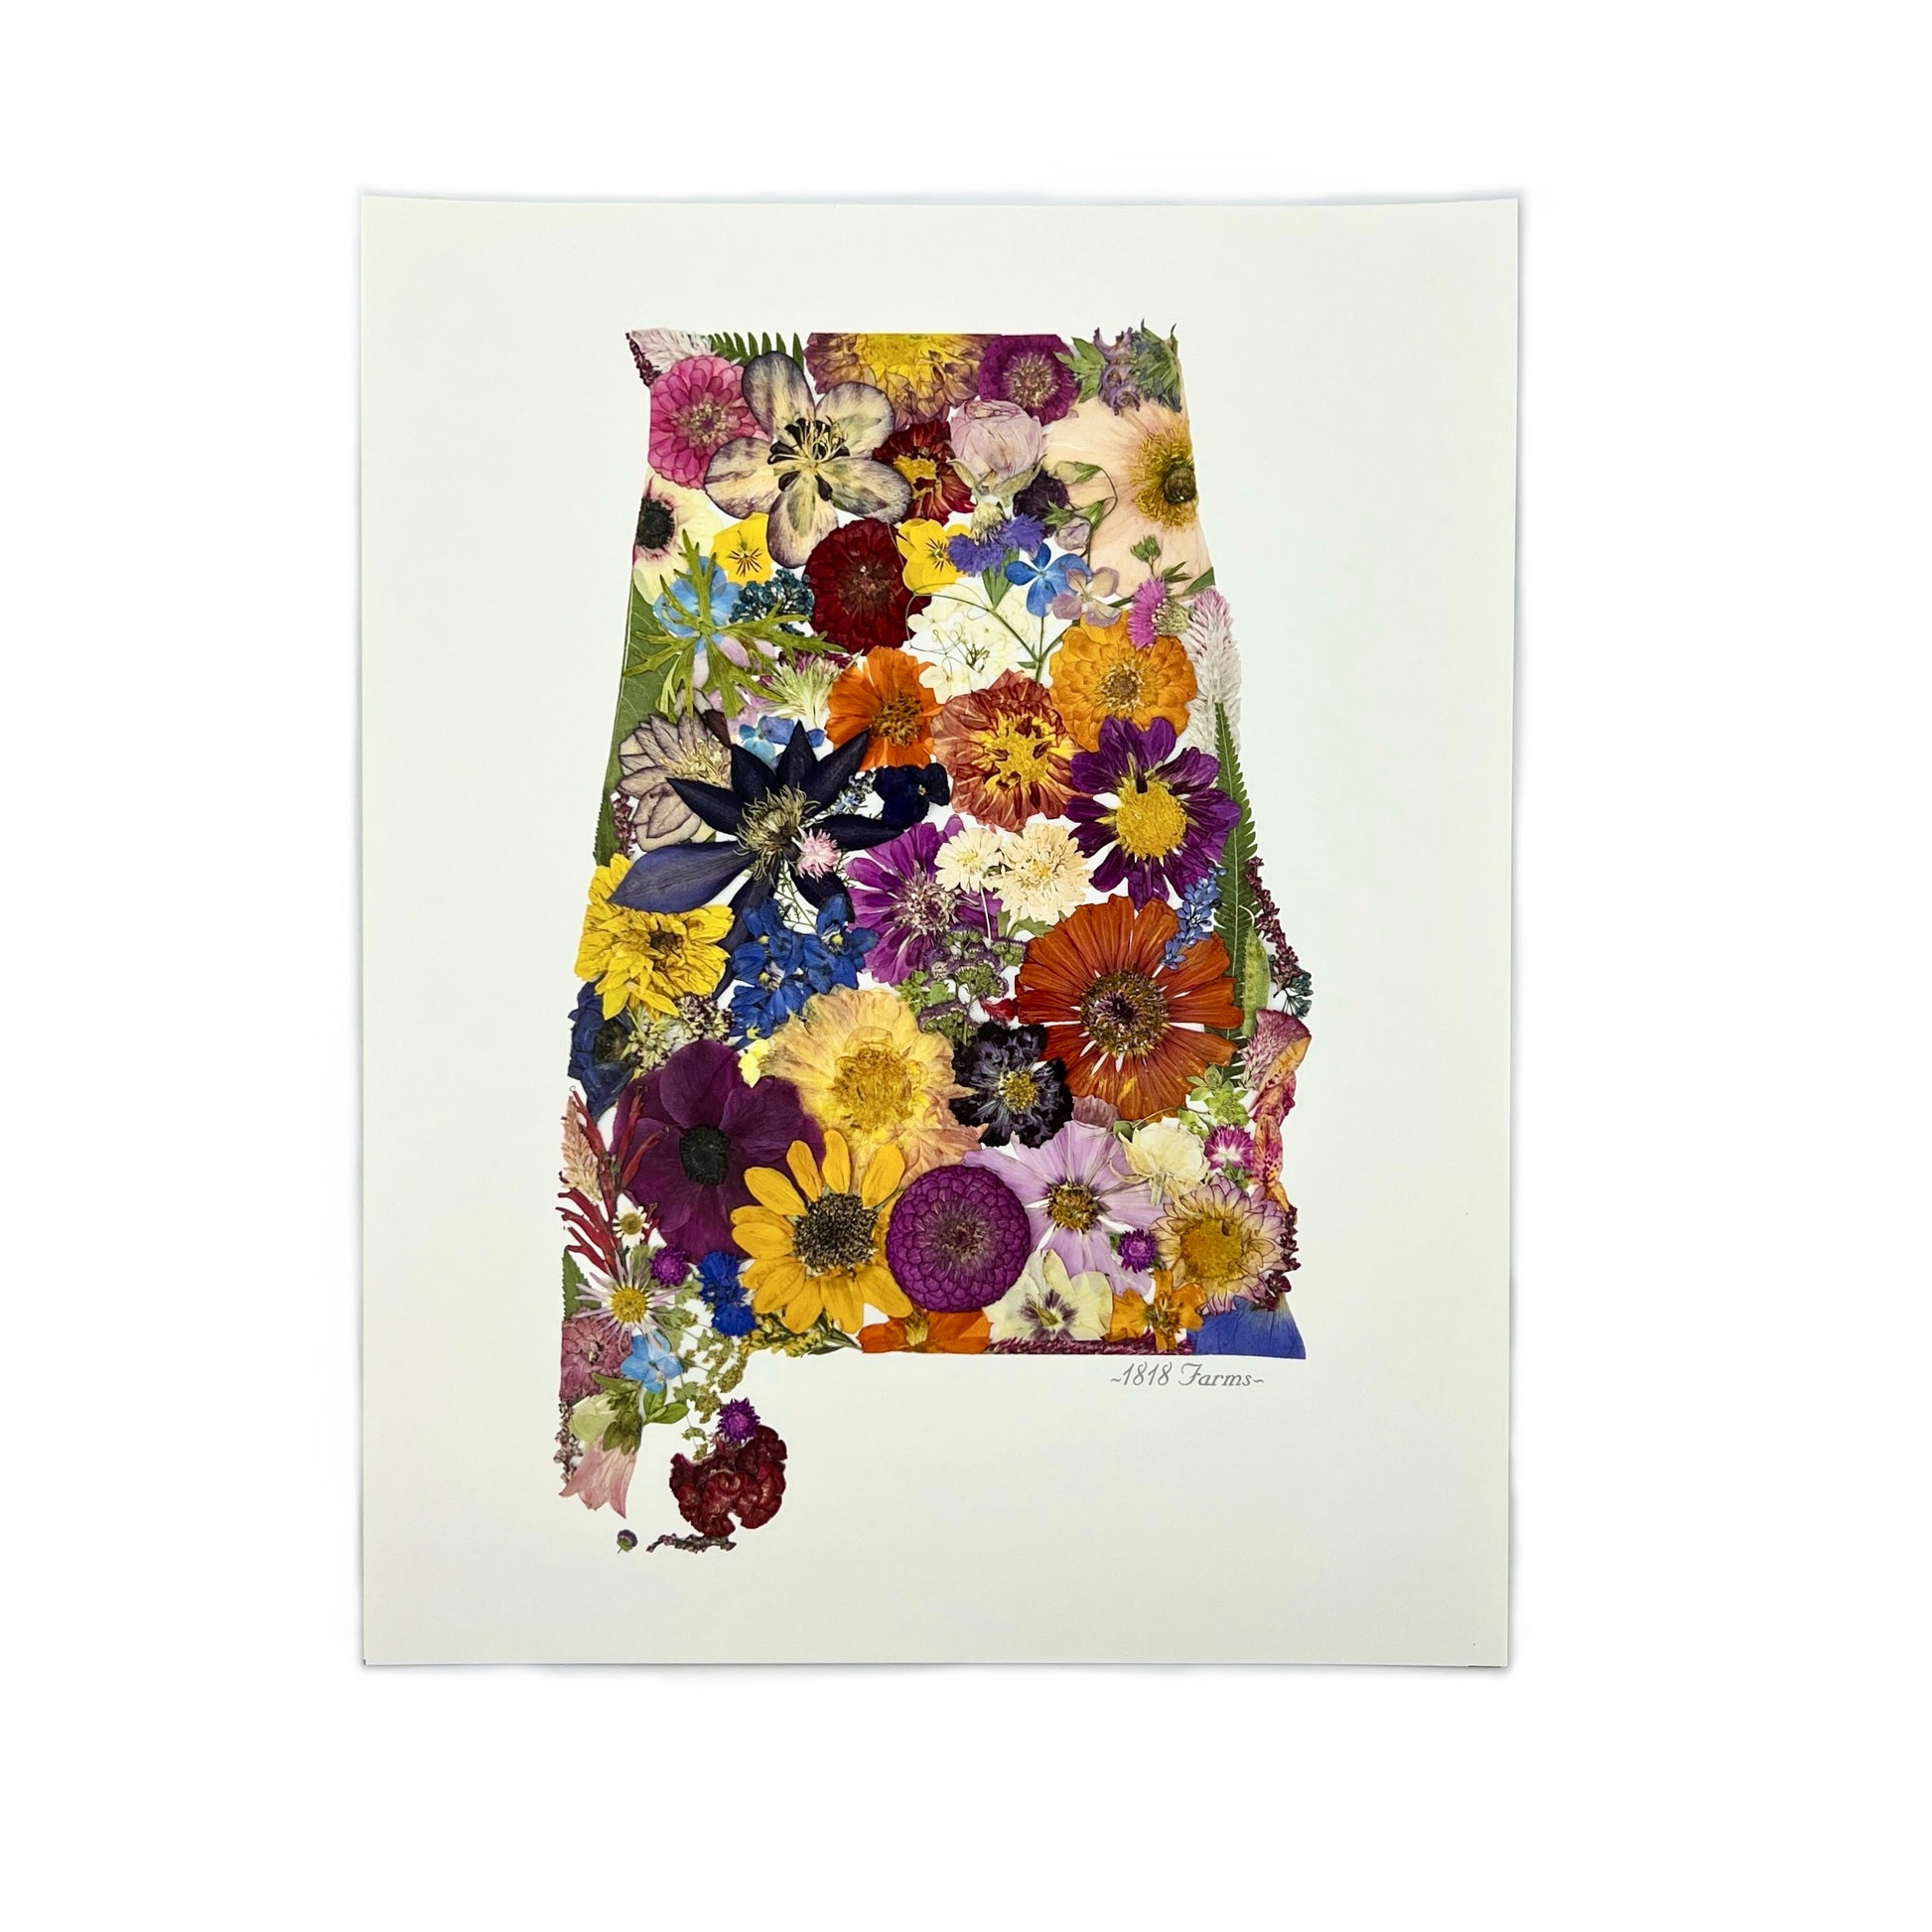 Alabama Themed Giclée Print Featuring Dried, Pressed Flowers - "Where I Bloom" Collection Giclee Art Print 1818 Farms 8"x10"  